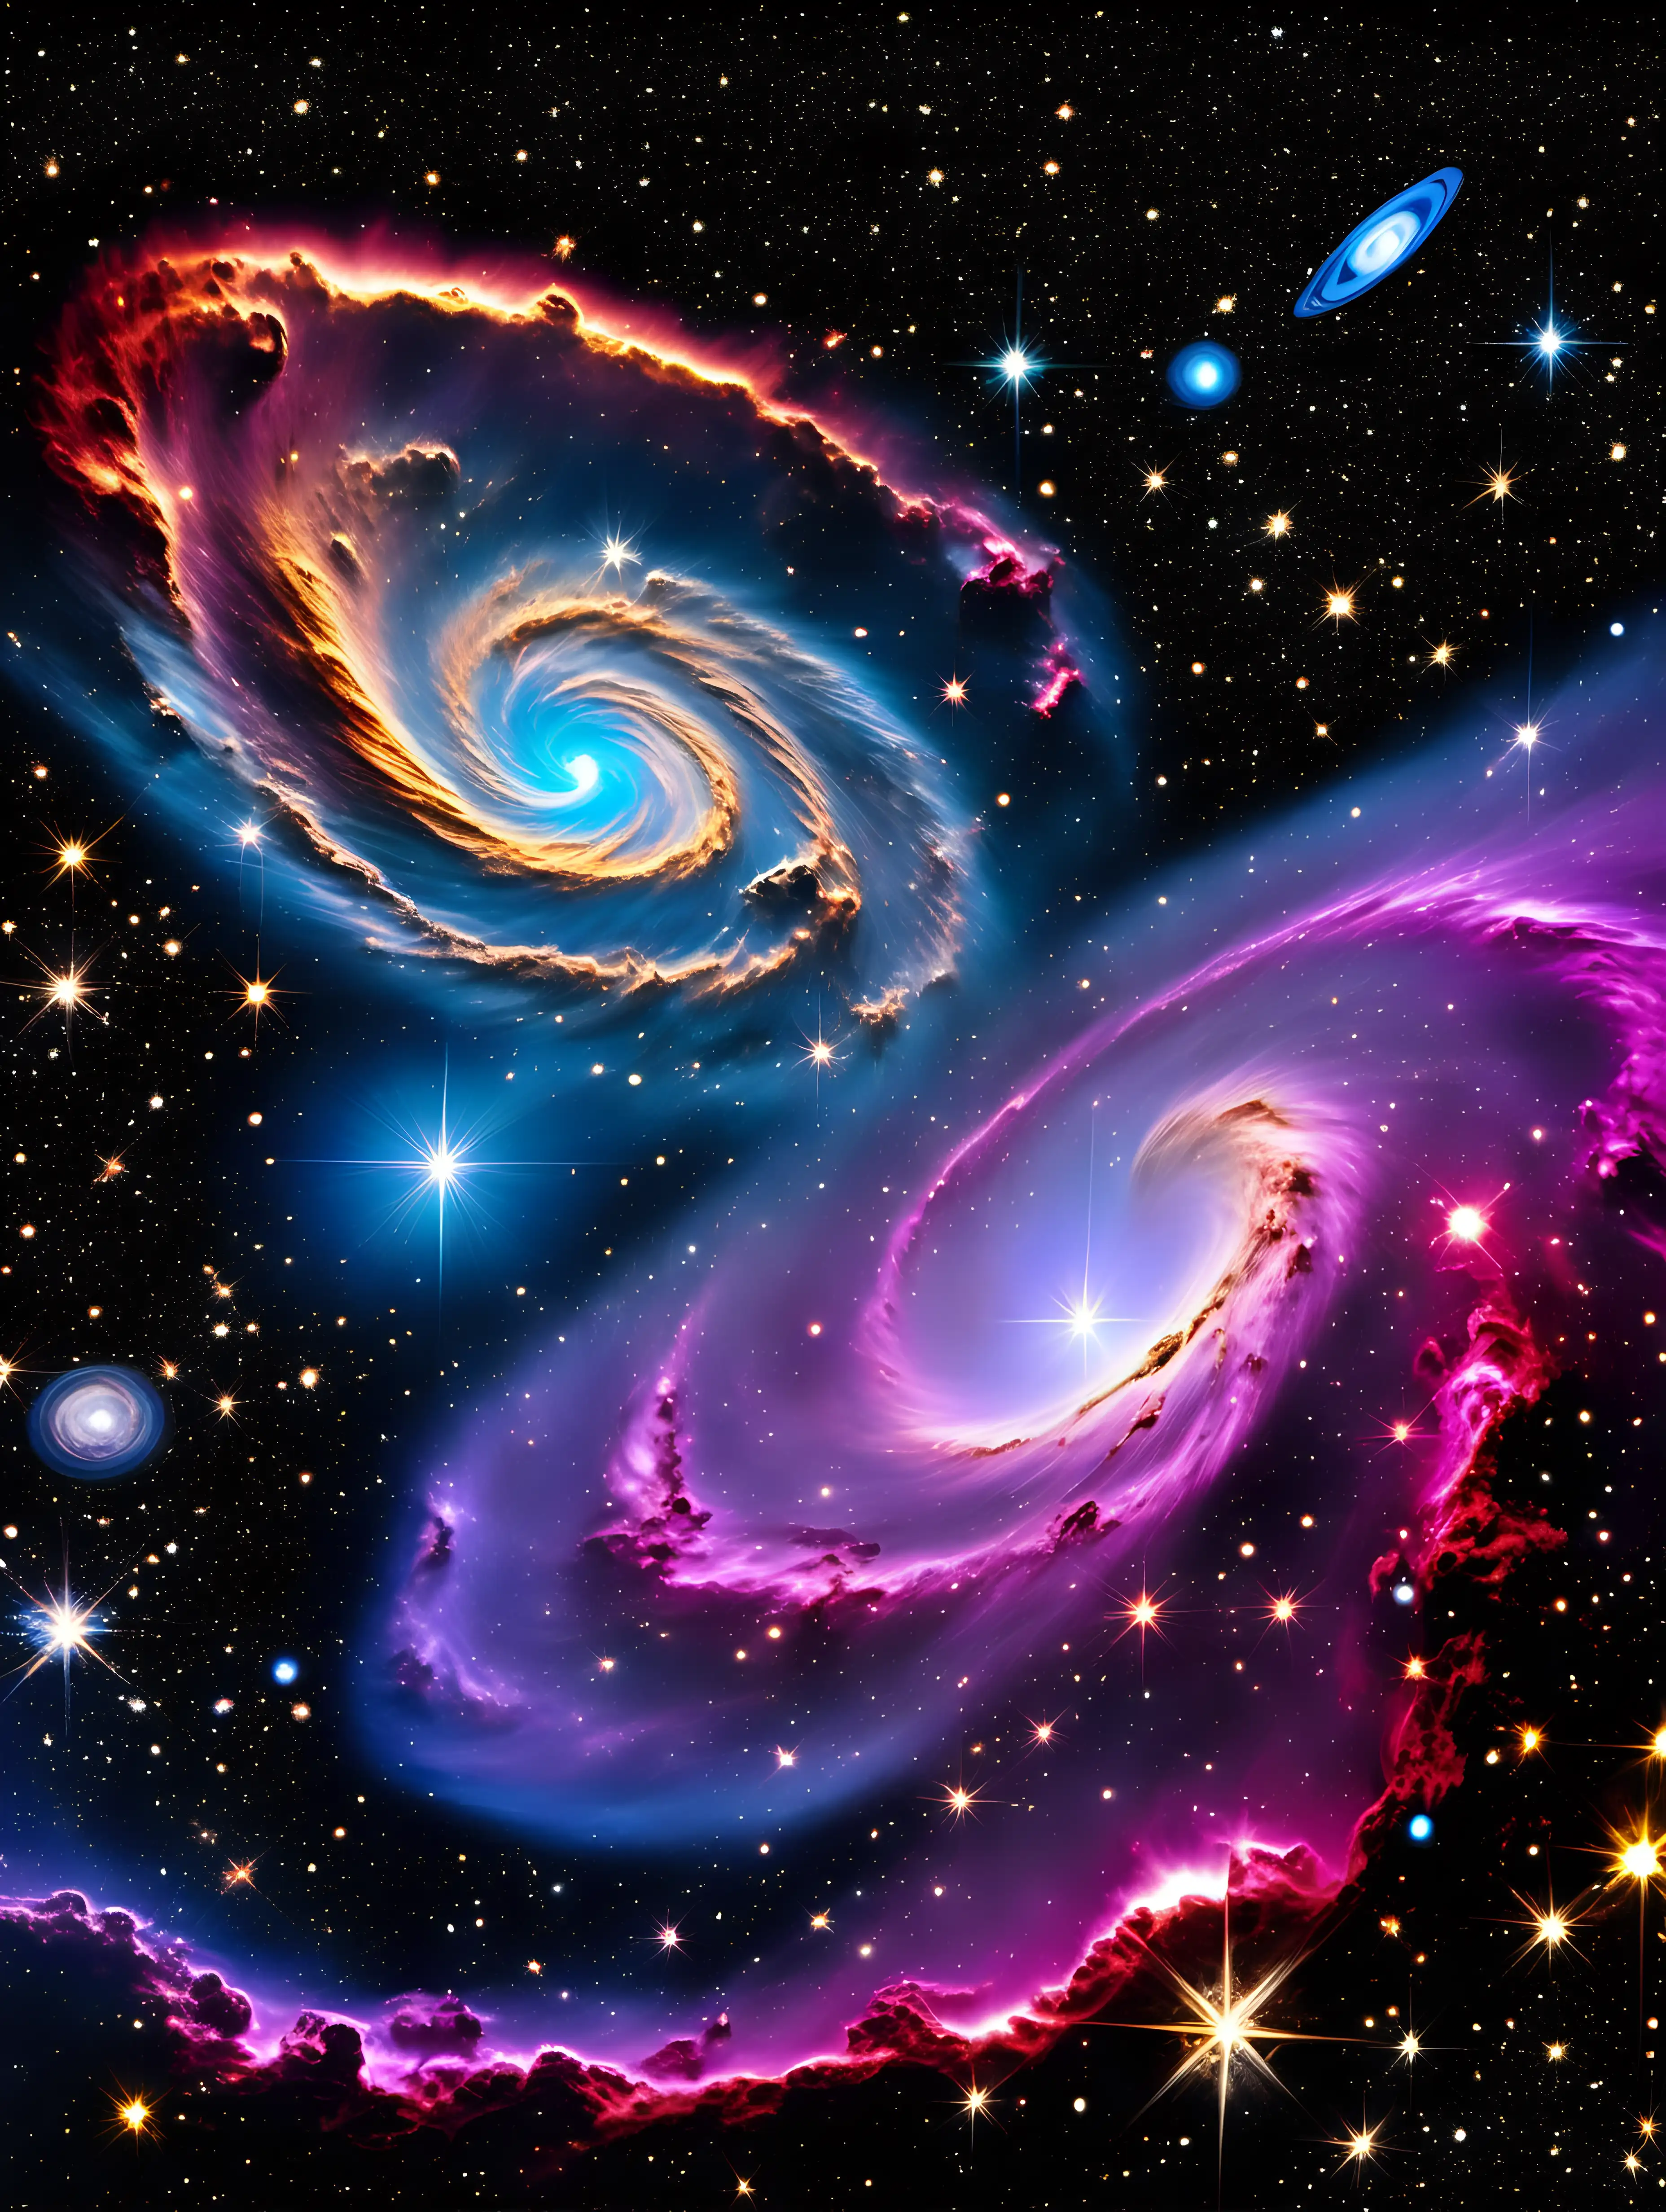 Imagine a vast, infinite expanse of the universe, where countless stars twinkle against the deep, velvety darkness of space. Nebulae swirl in vibrant hues of blue, purple, and pink, casting an ethereal glow that illuminates nearby celestial bodies. Planets of various sizes and colors orbit around their stars in a harmonious dance, while distant galaxies spiral gracefully in the backdrop. Comets with glowing tails streak across the sky, leaving behind trails of light as they journey through the cosmos. This serene yet dynamic scene captures the majesty and mystery of the universe, inviting the viewer to ponder the endless possibilities that lie beyond our own world. The image is rich in detail, with every element contributing to a sense of awe and wonder, showcasing the universe's vast beauty and complexity.